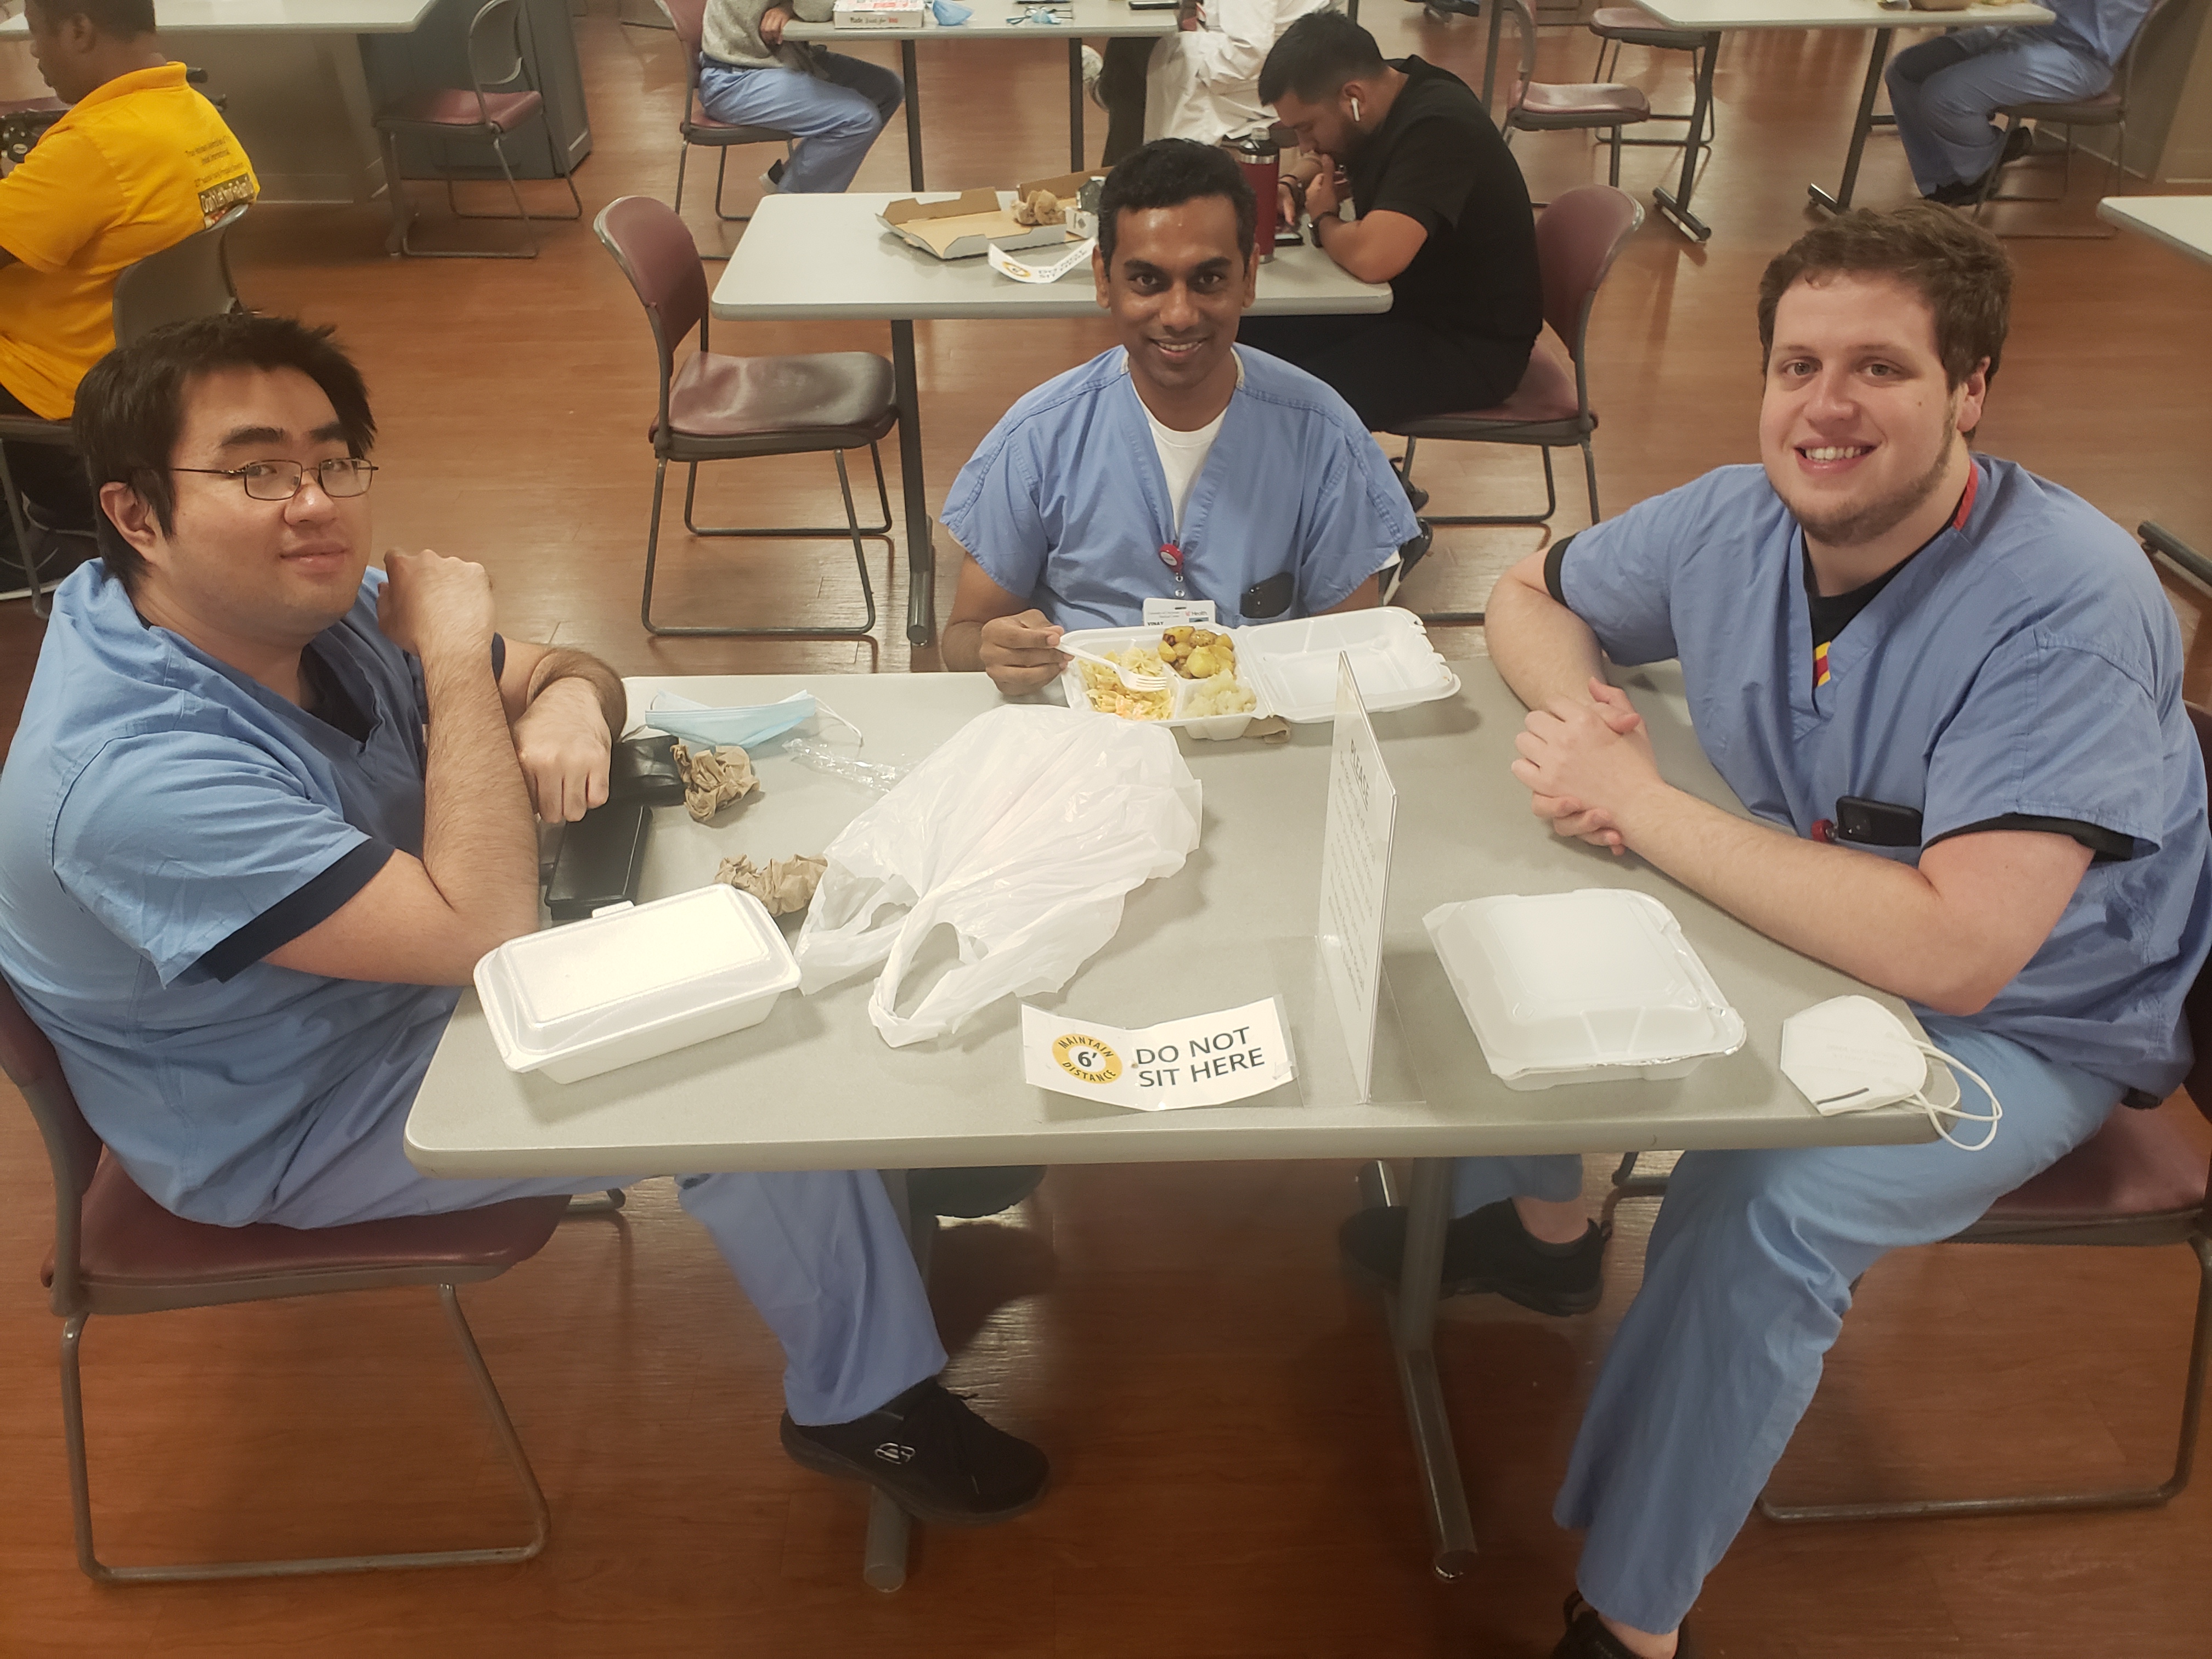 Three PGY3 Residents at Lunch in Cafeteria